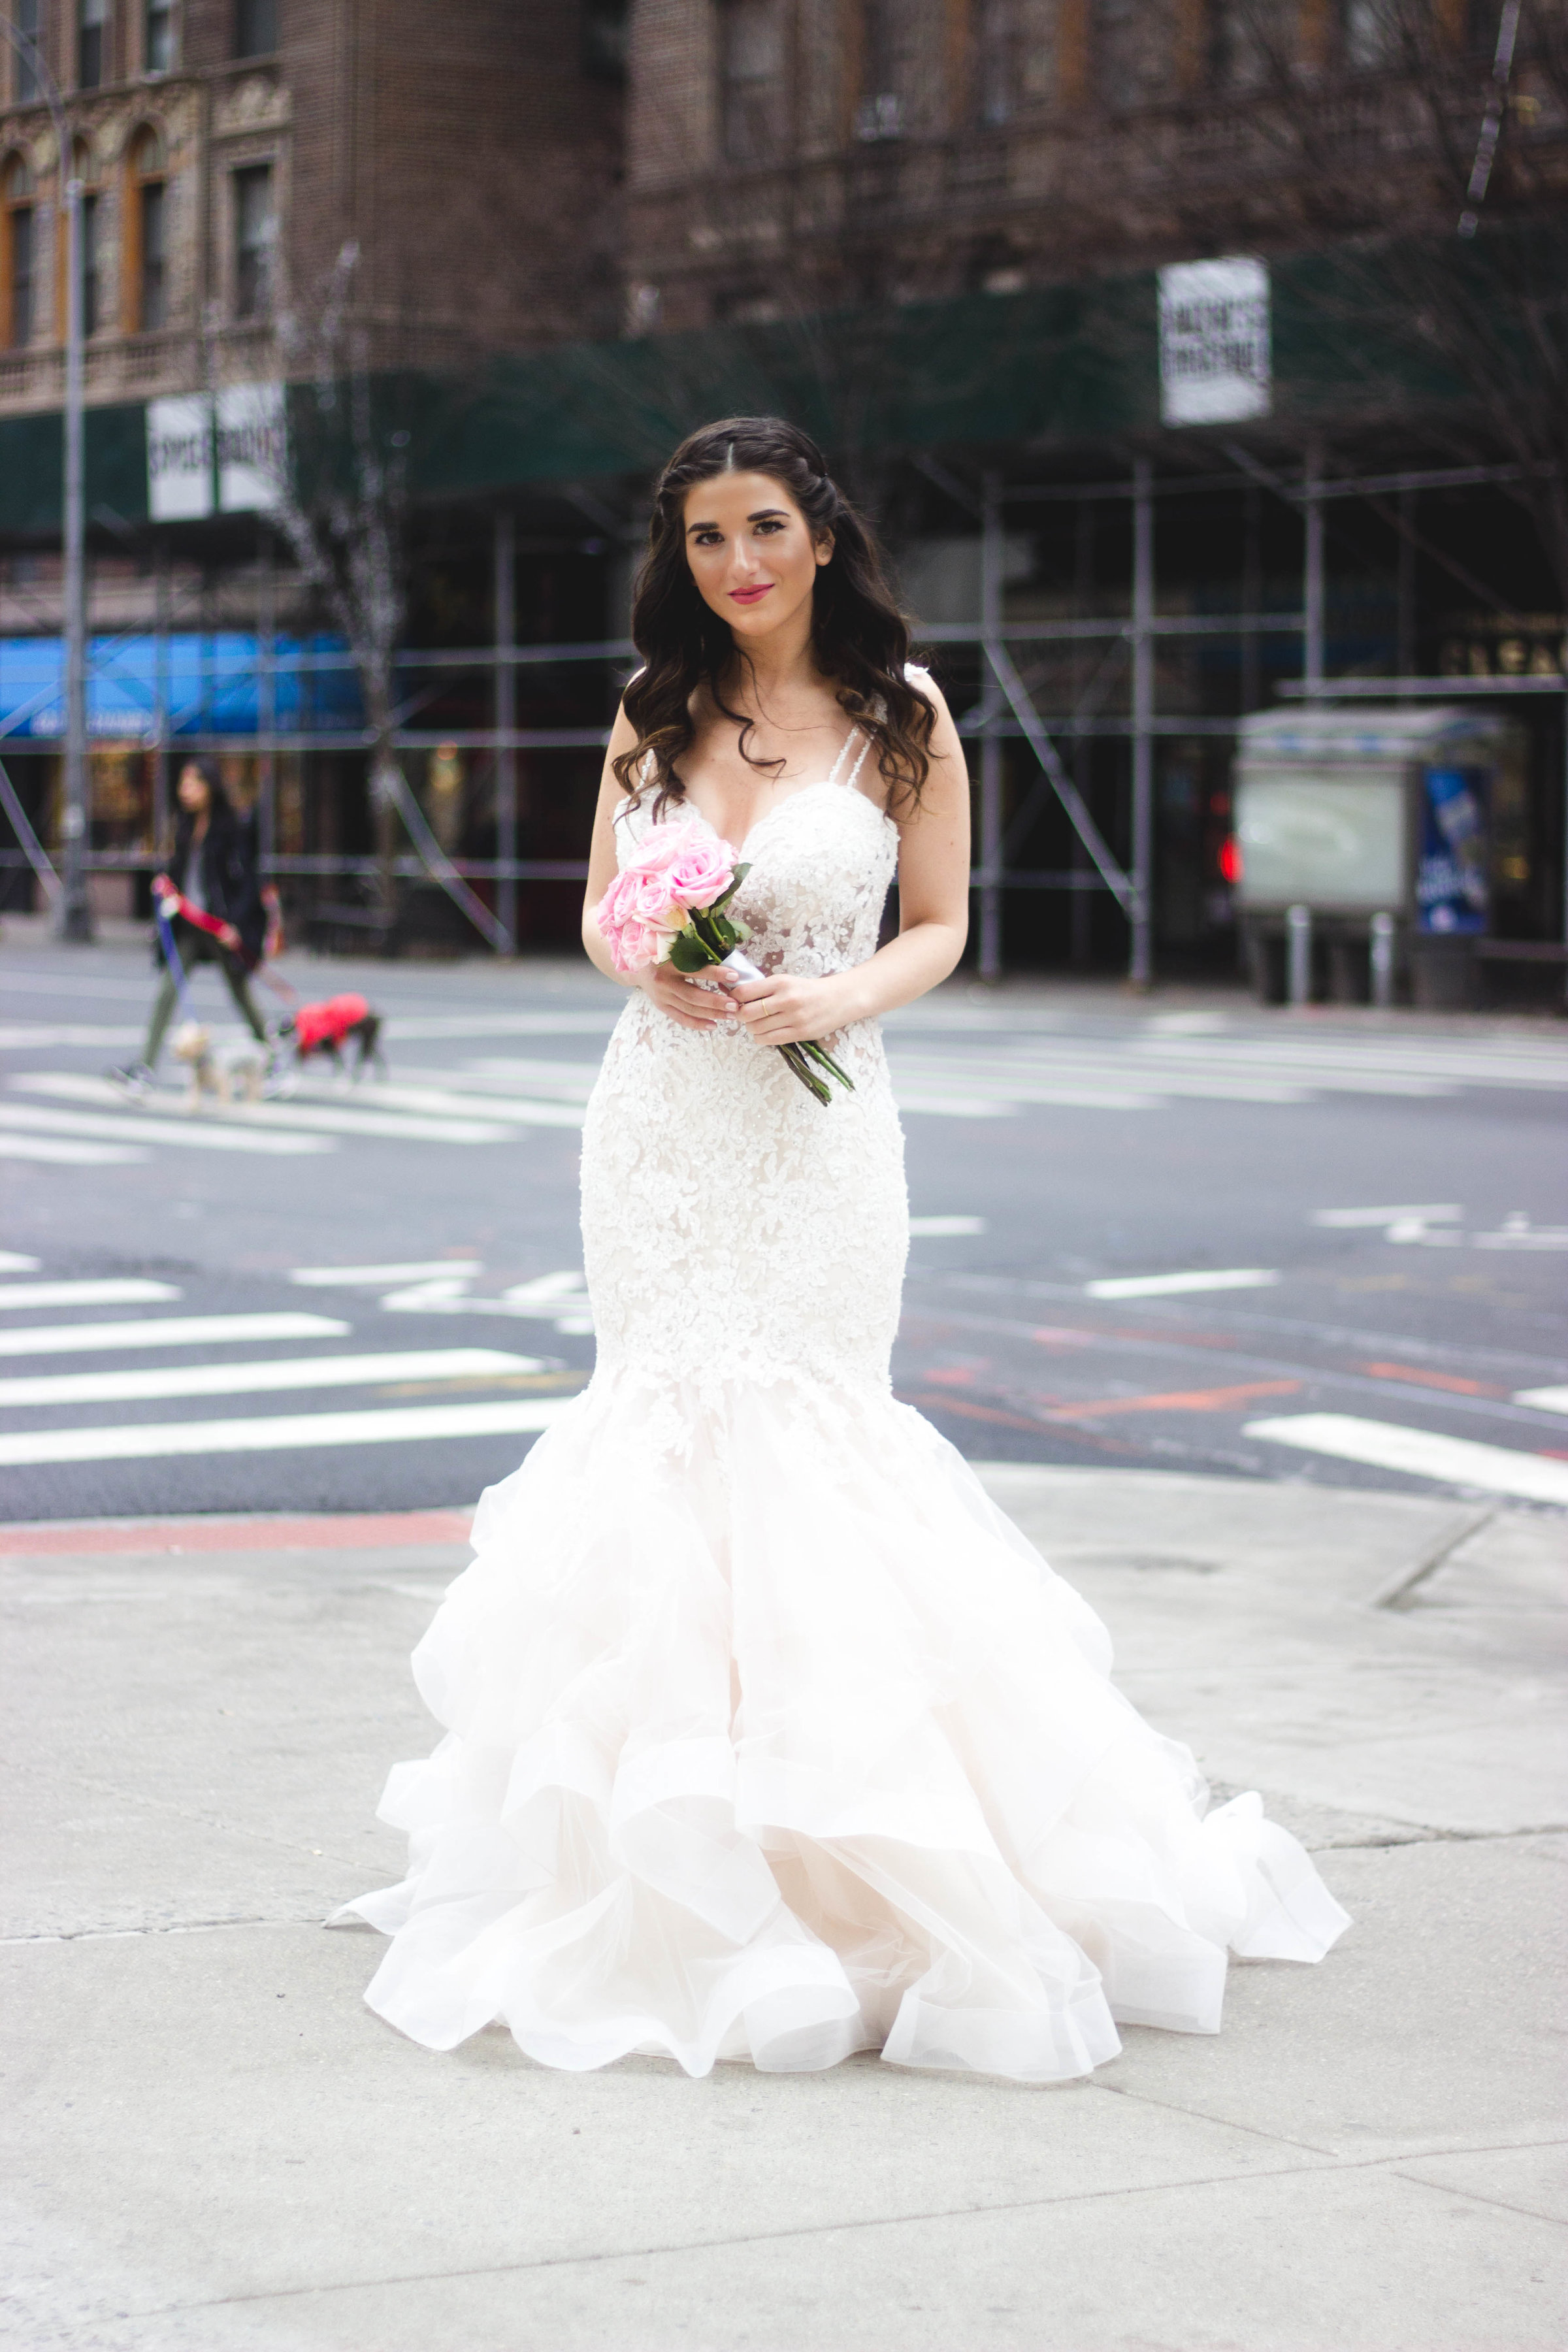 Playing Dress Up With Morilee Bridal Esther Santer Fashion Blog NYC Street Style Blogger Outfit OOTD Trendy Wedding Dress Gown White Dreamy  Modern Timeless Beautiful Train Pink Flowers Bouquet Hair Hairstyle Beauty Makeup Lace Mermaid Trumpet Flare.jpg